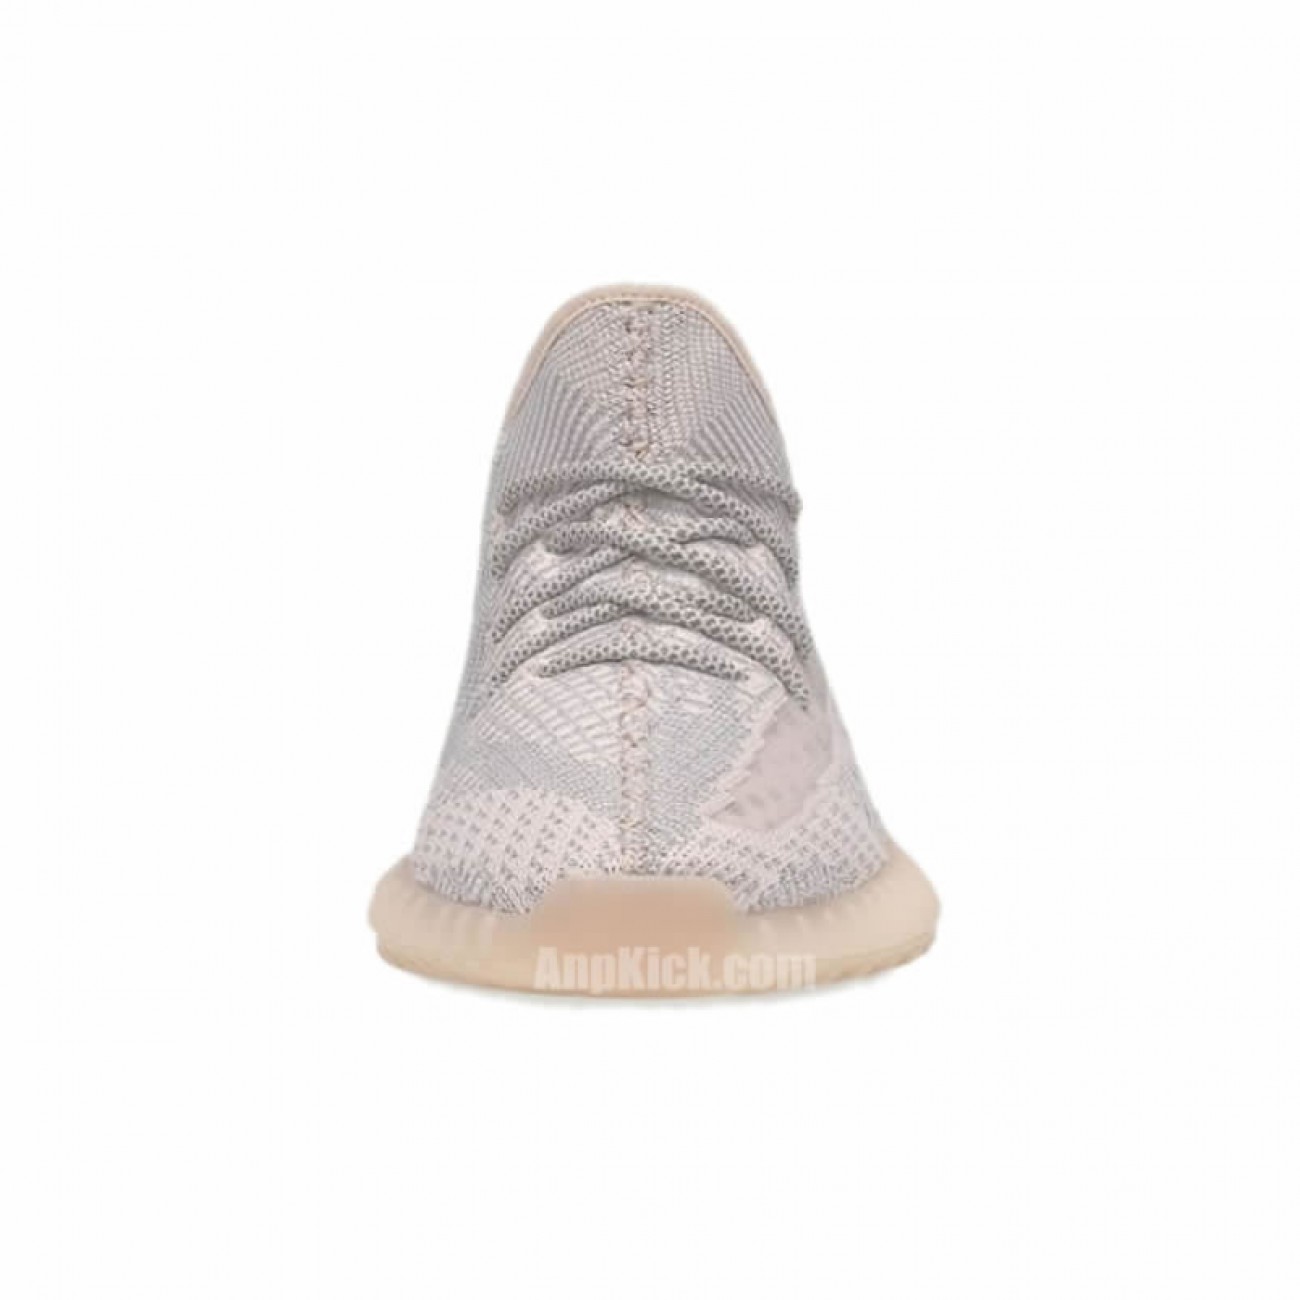 Yeezy Boost 350 V2 "Synth" None-Reflective Pink Release Date For Sale FV5578